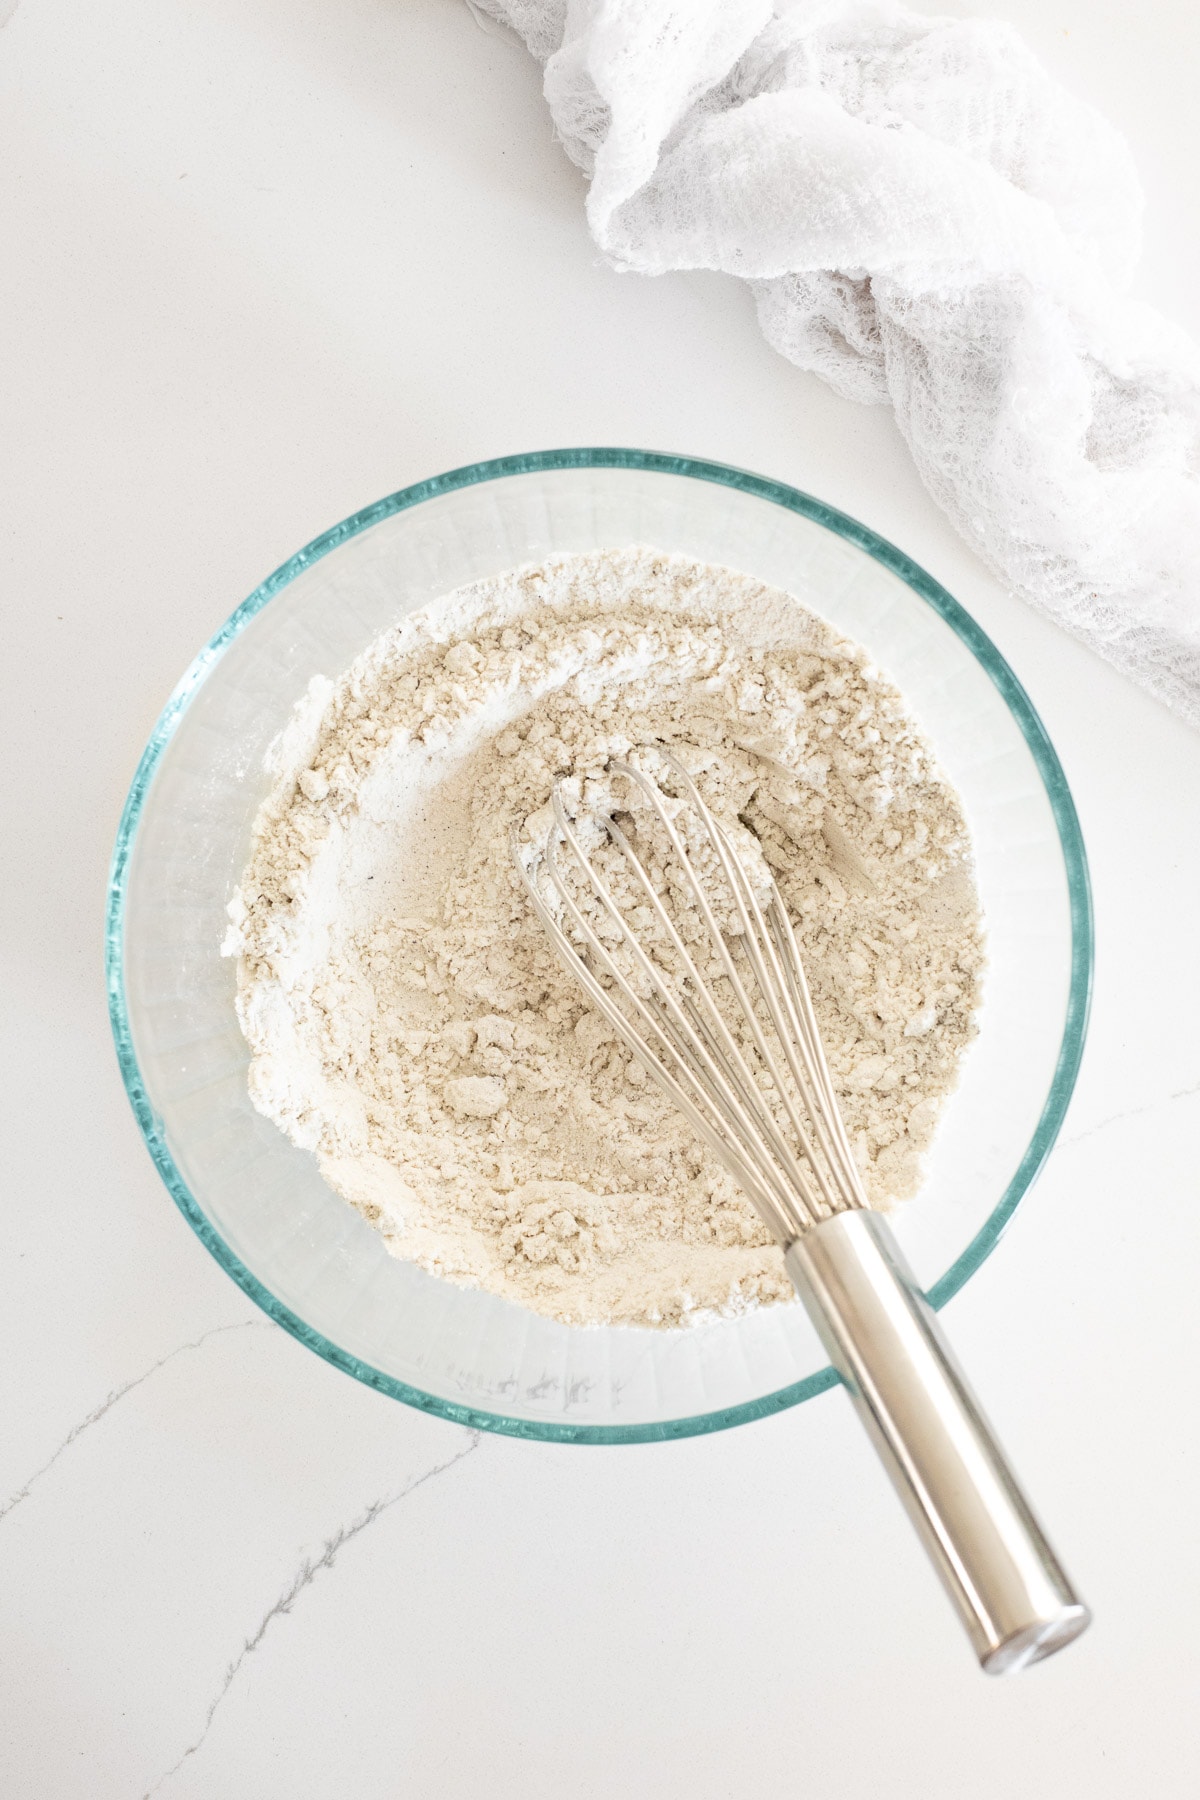 Dry ingredients for coffee cake whisked together in a bowl.